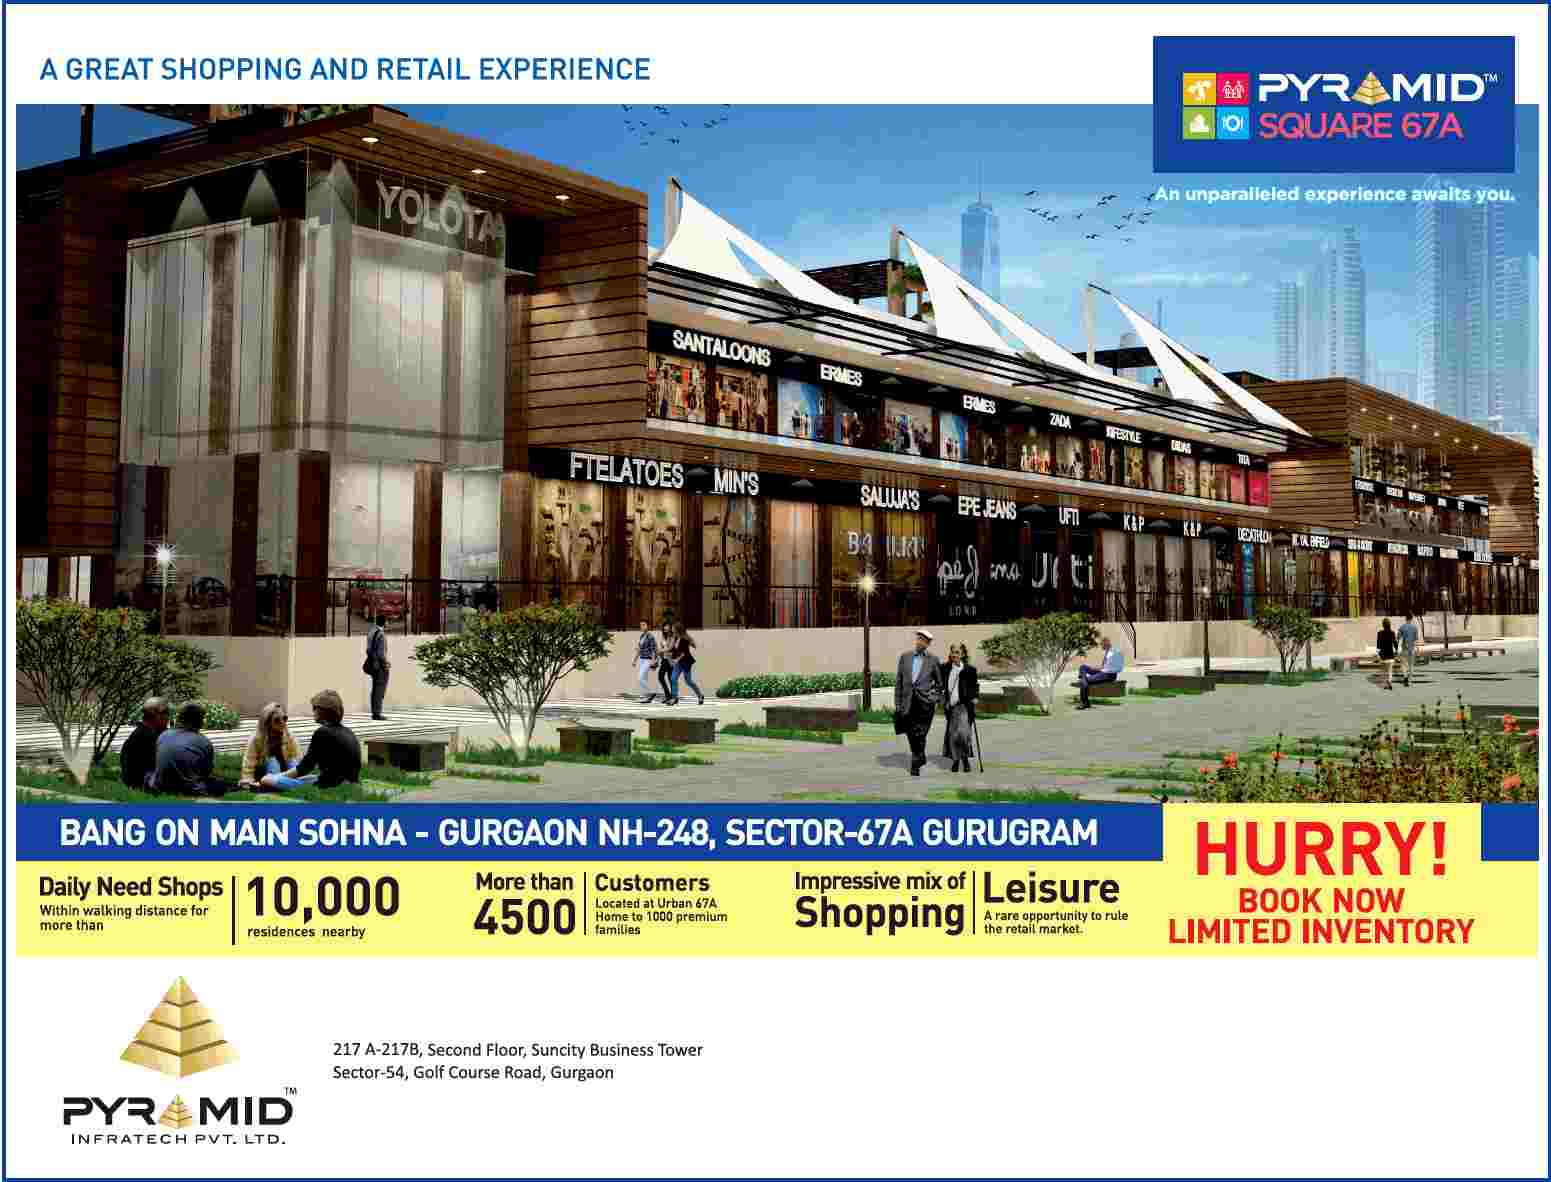 Pyramid Square 67A will give you great shopping and retail experience in Gurgaon Update